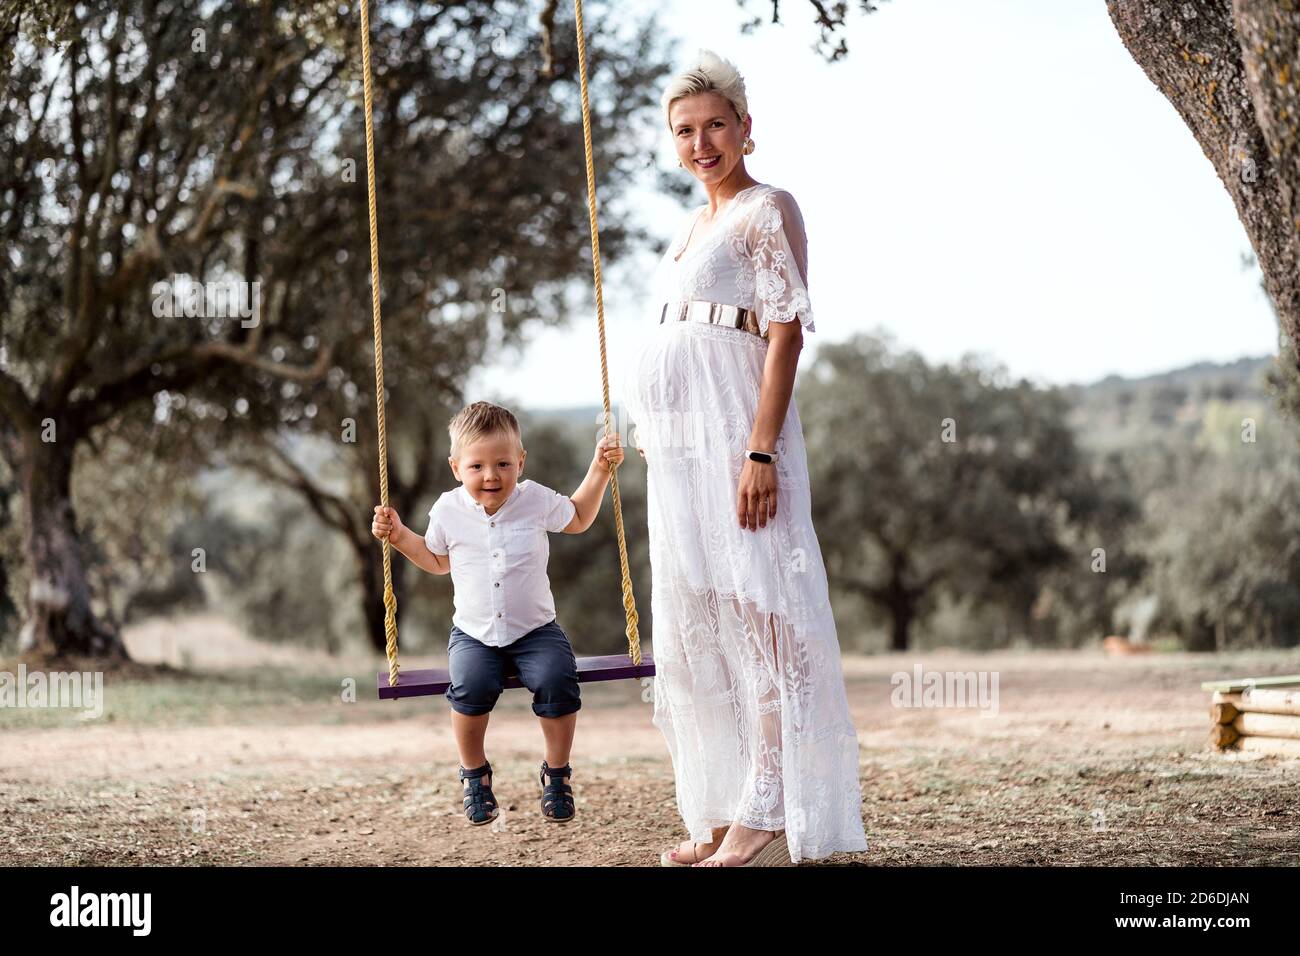 Pregnant woman having fun with her toddler son on the swing in the park Stock Photo